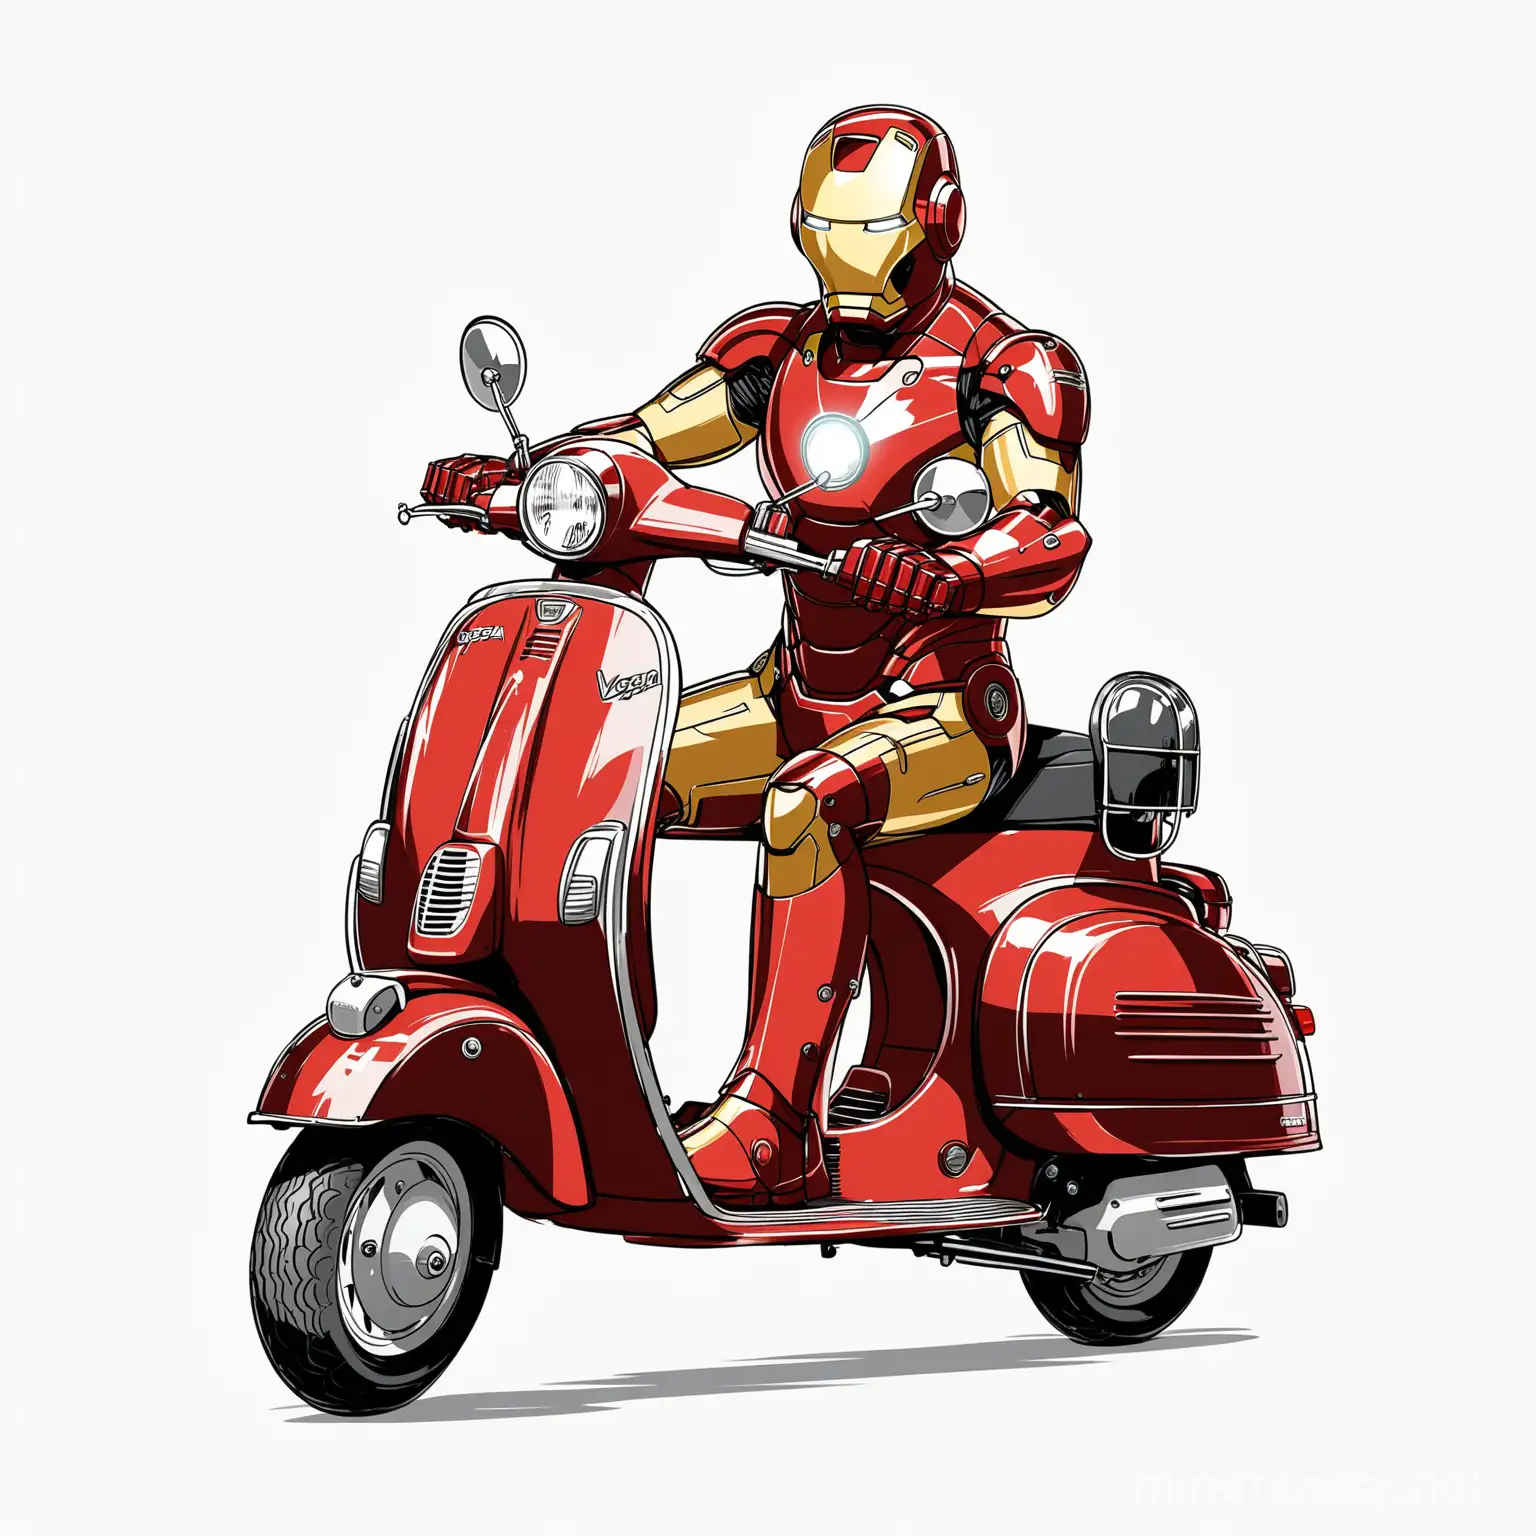 Iron Man drive a scooter Vespa, On a white background